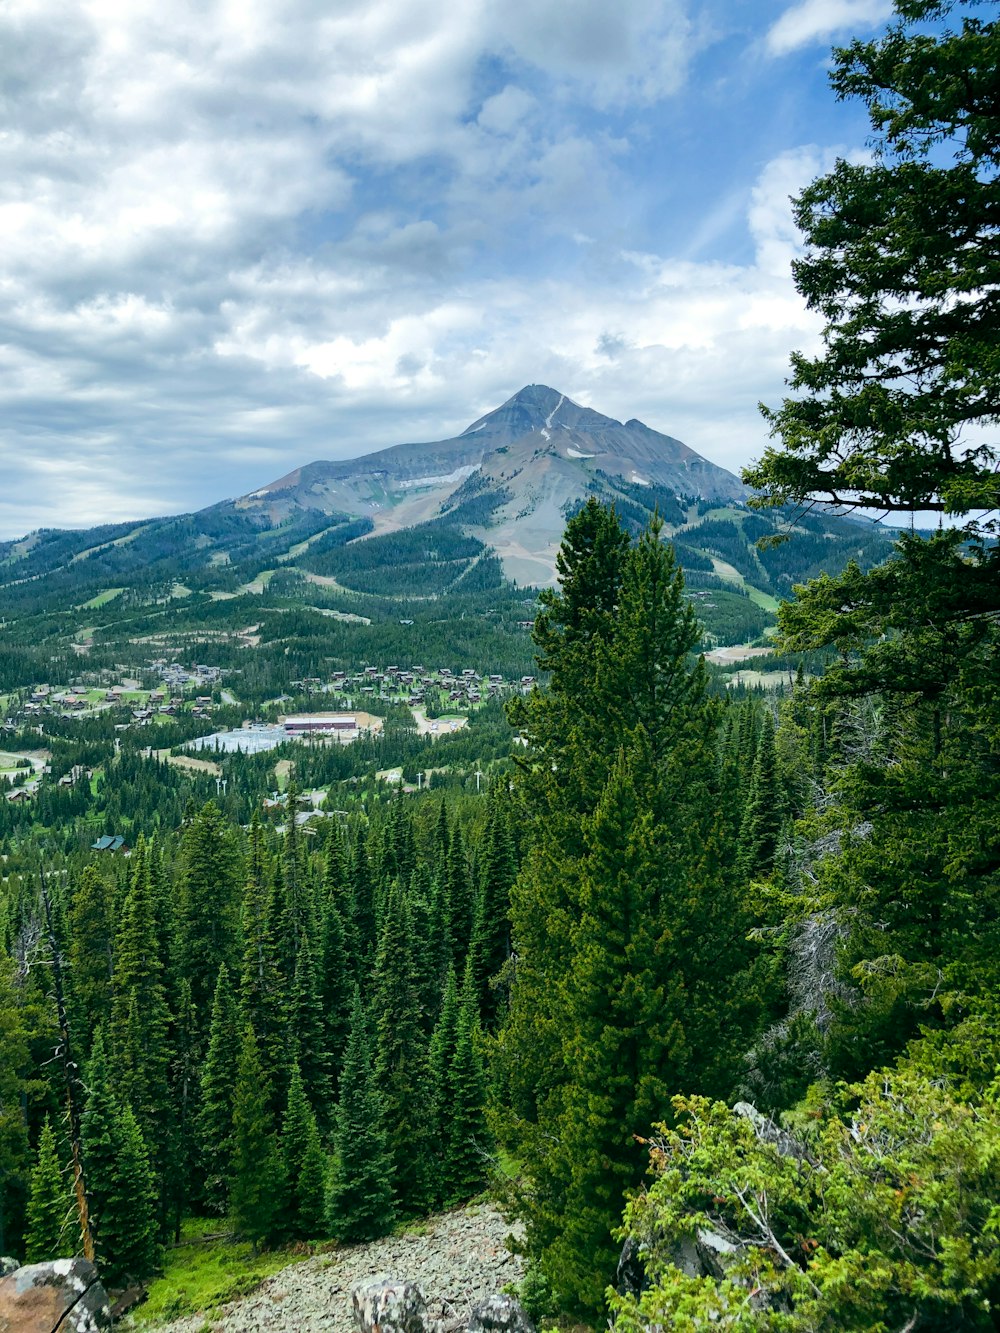 a scenic view of a mountain with trees and mountains in the background